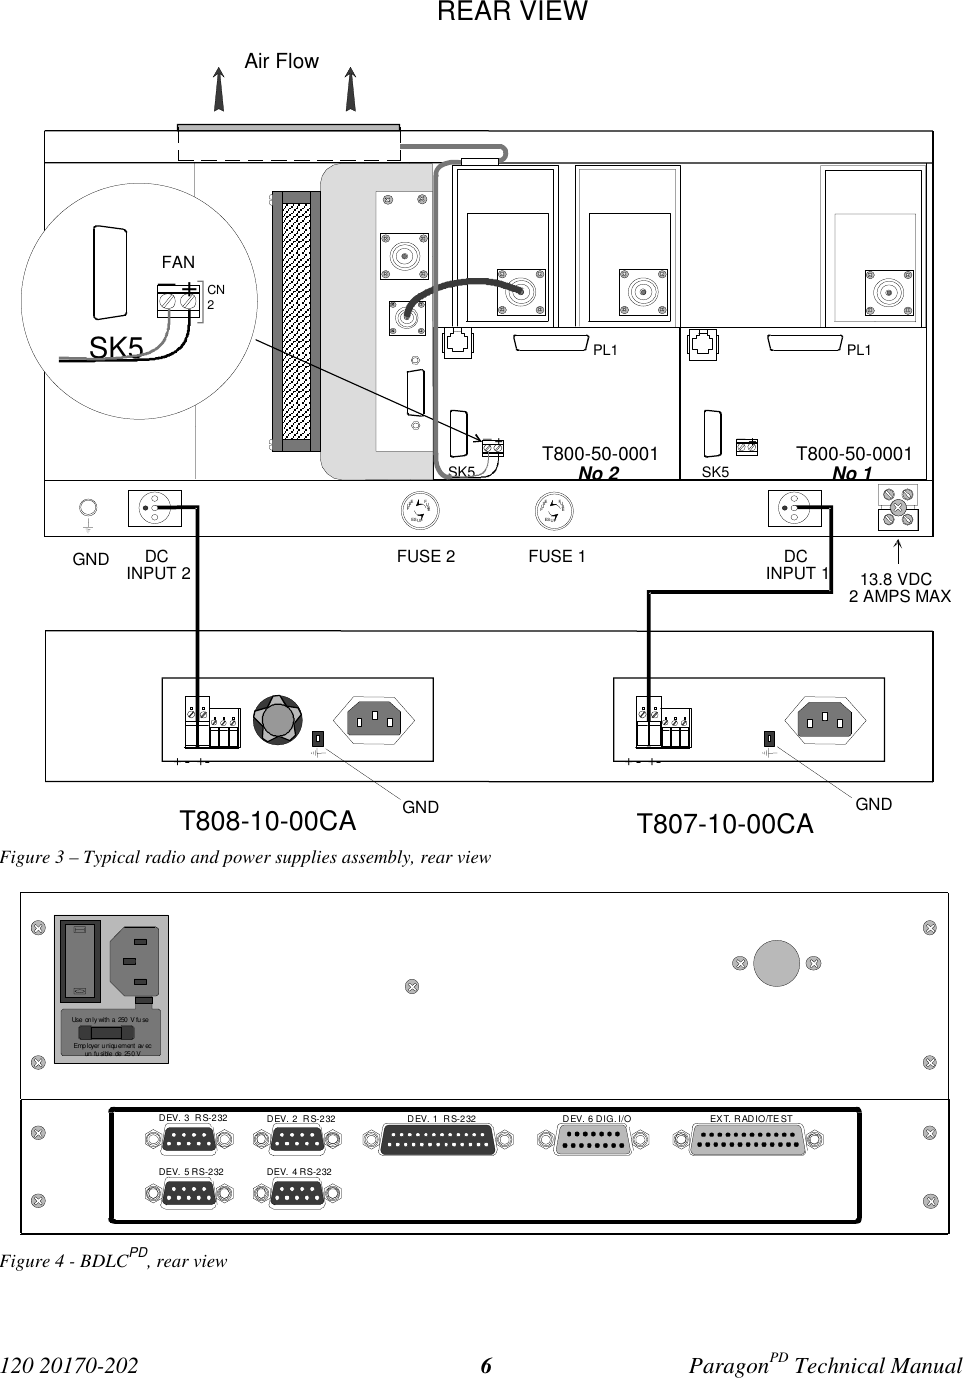 120 20170-202 ParagonPD Technical Manual6Figure 3 – Typical radio and power supplies assembly, rear viewFigure 4 - BDLCPD, rear viewEmployer uniquement avecun  fu si ble  de  250 VUse  on l y with  a  250  V fu seDEV. 3  RS-232DEV. 5  RS-232DEV. 2  RS-232DEV. 4  RS-232DEV. 1  RS-232 DEV. 6 DIG. I/O EXT. RADIO/TESTT808-10-00CA T807-10-00CAREAR VIEWAir FlowGNDDCINPUT 1FUSE 1FUSE 2DCINPUT 2 13.8 VDC2 AMPS MAXFUSEFUSEFUSEFUSEFUSEFUSE+-+-+-+-GNDGNDT800-50-0001No 1PL1SK5T800-50-0001No 2PL1SK5_+_+SK5_+FANCN2